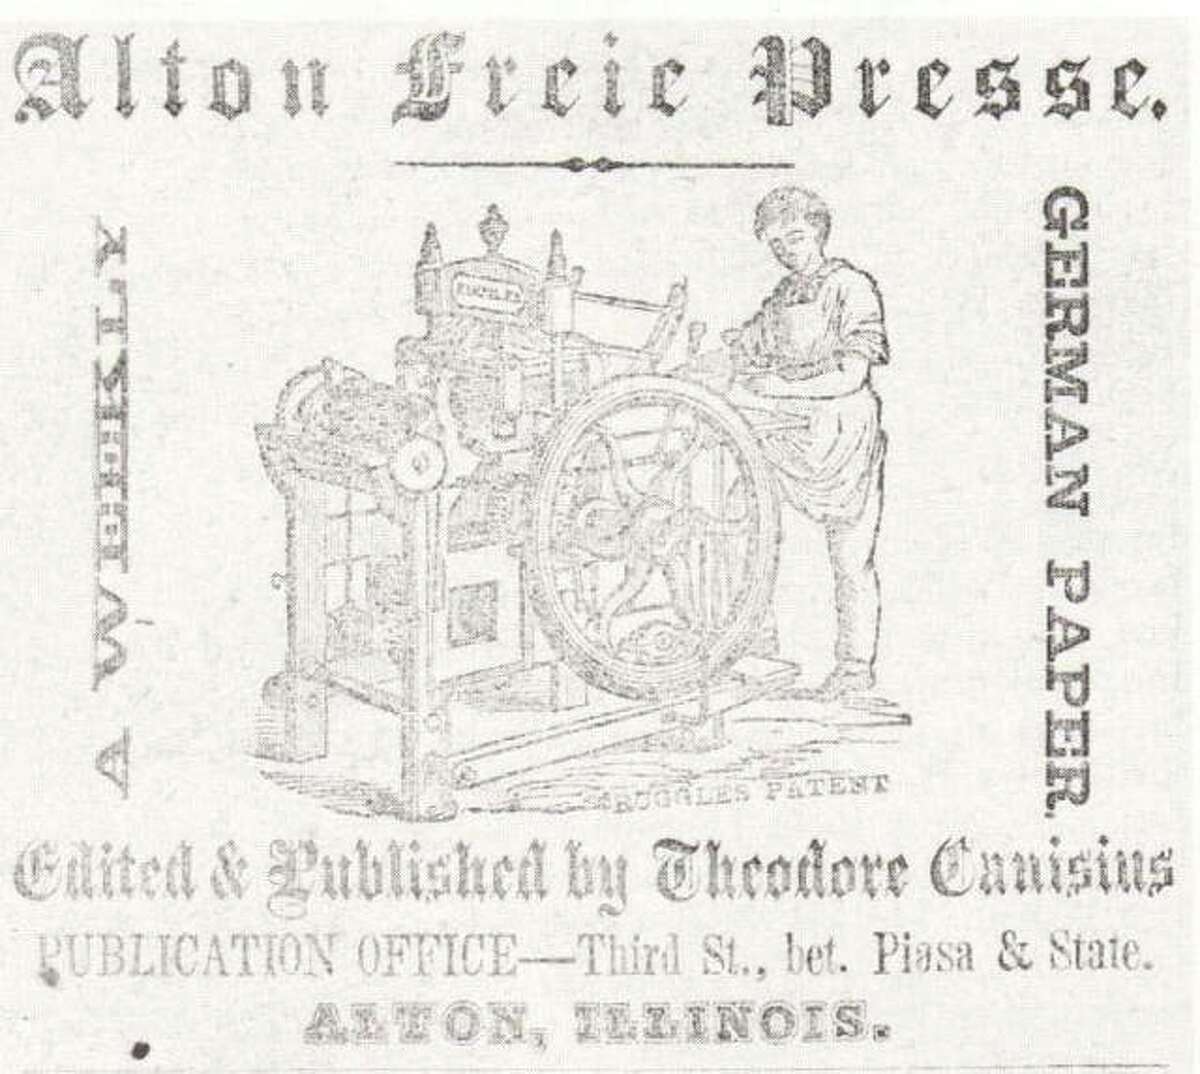 This Alton Freie Presse ad appeared in the 1858 Alton City Directory. The advertisement was for the German newspaper which was published weekly.